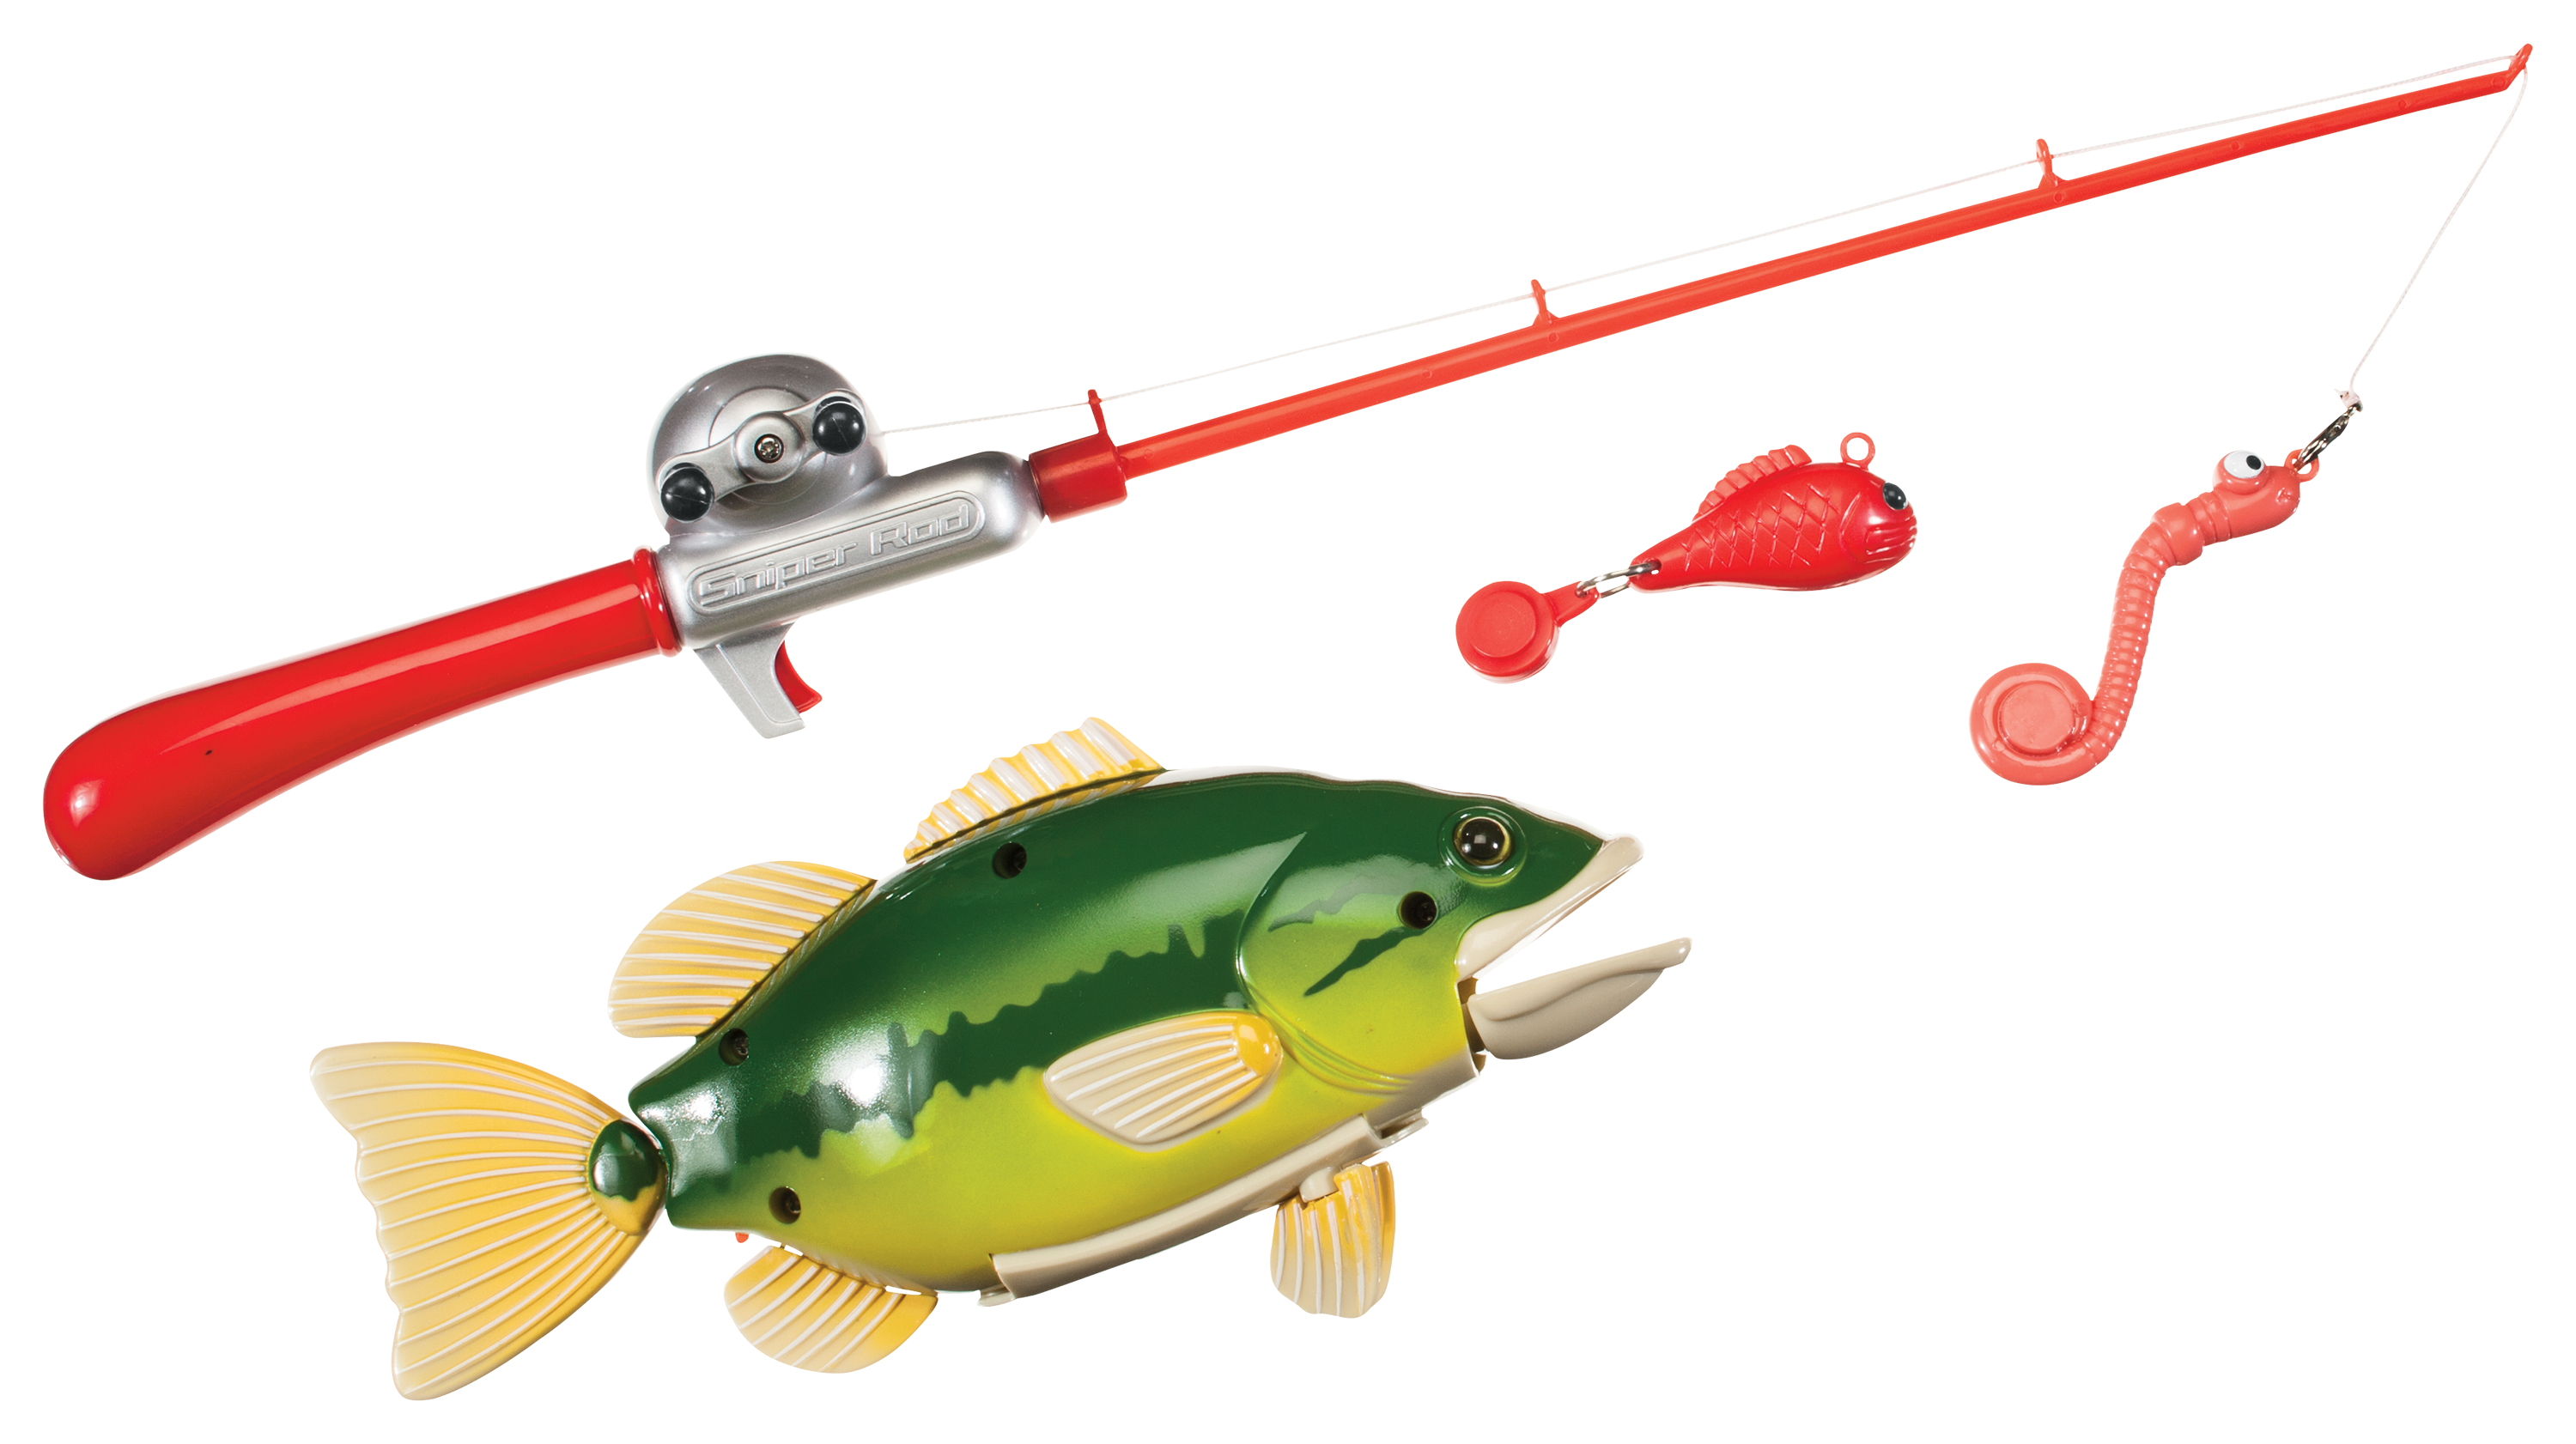 Small World Toys Catch of the Day Toy Fishing Game for Kids